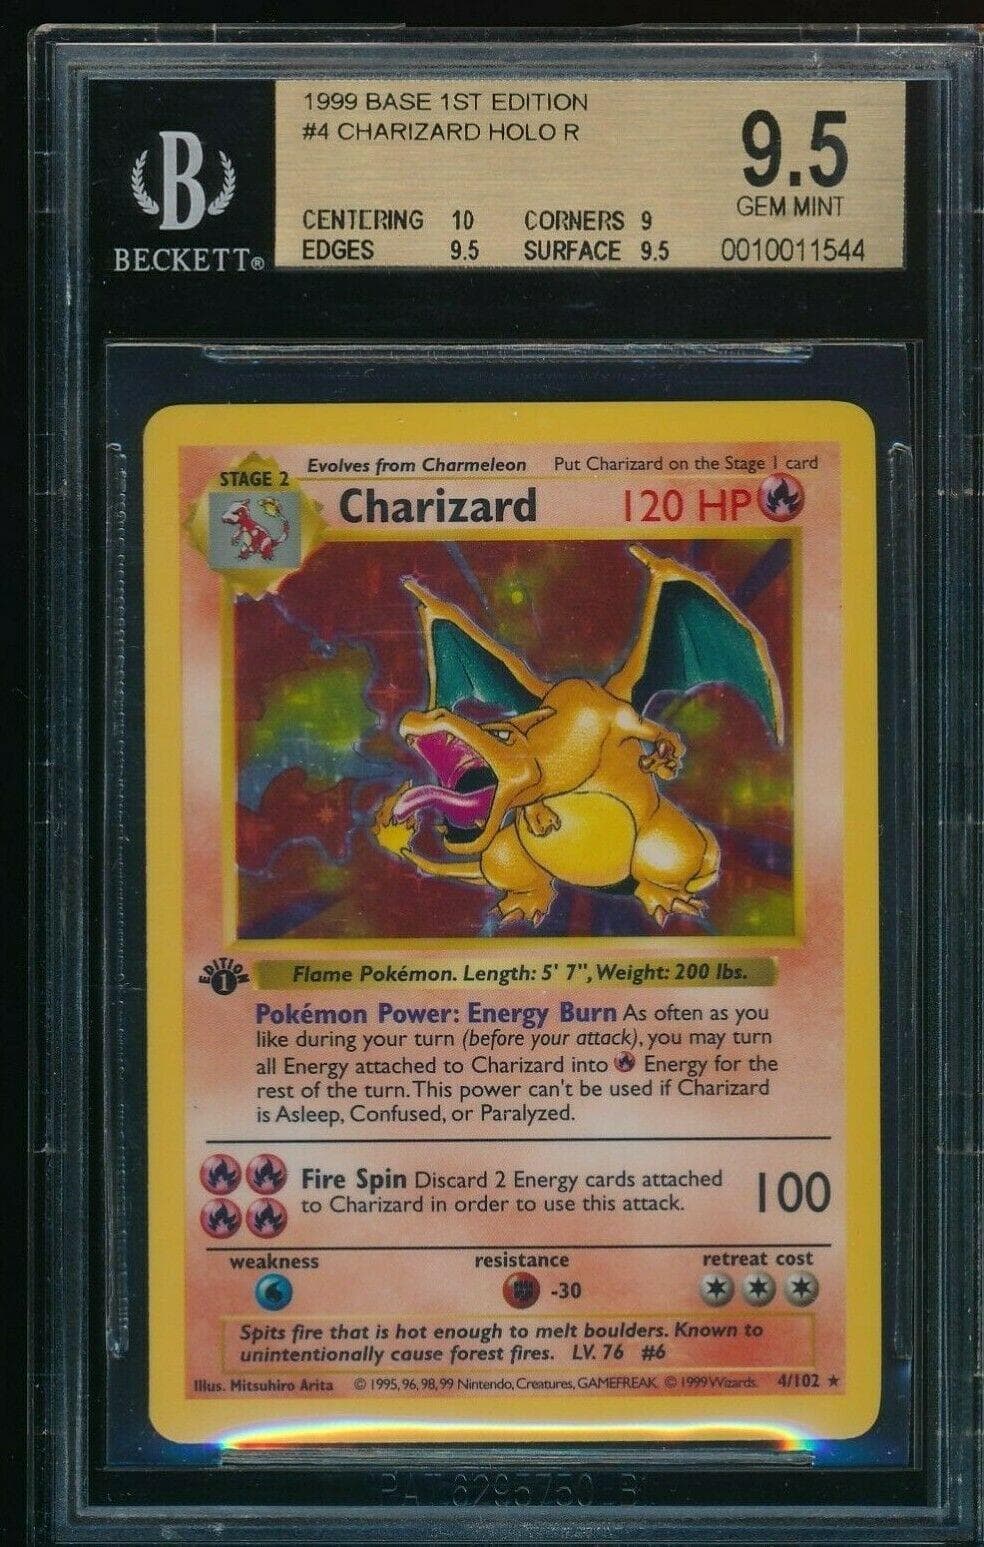 Random Incredibly Rare Pokémon Cards That Could Pay Off Your Student Loan Debt